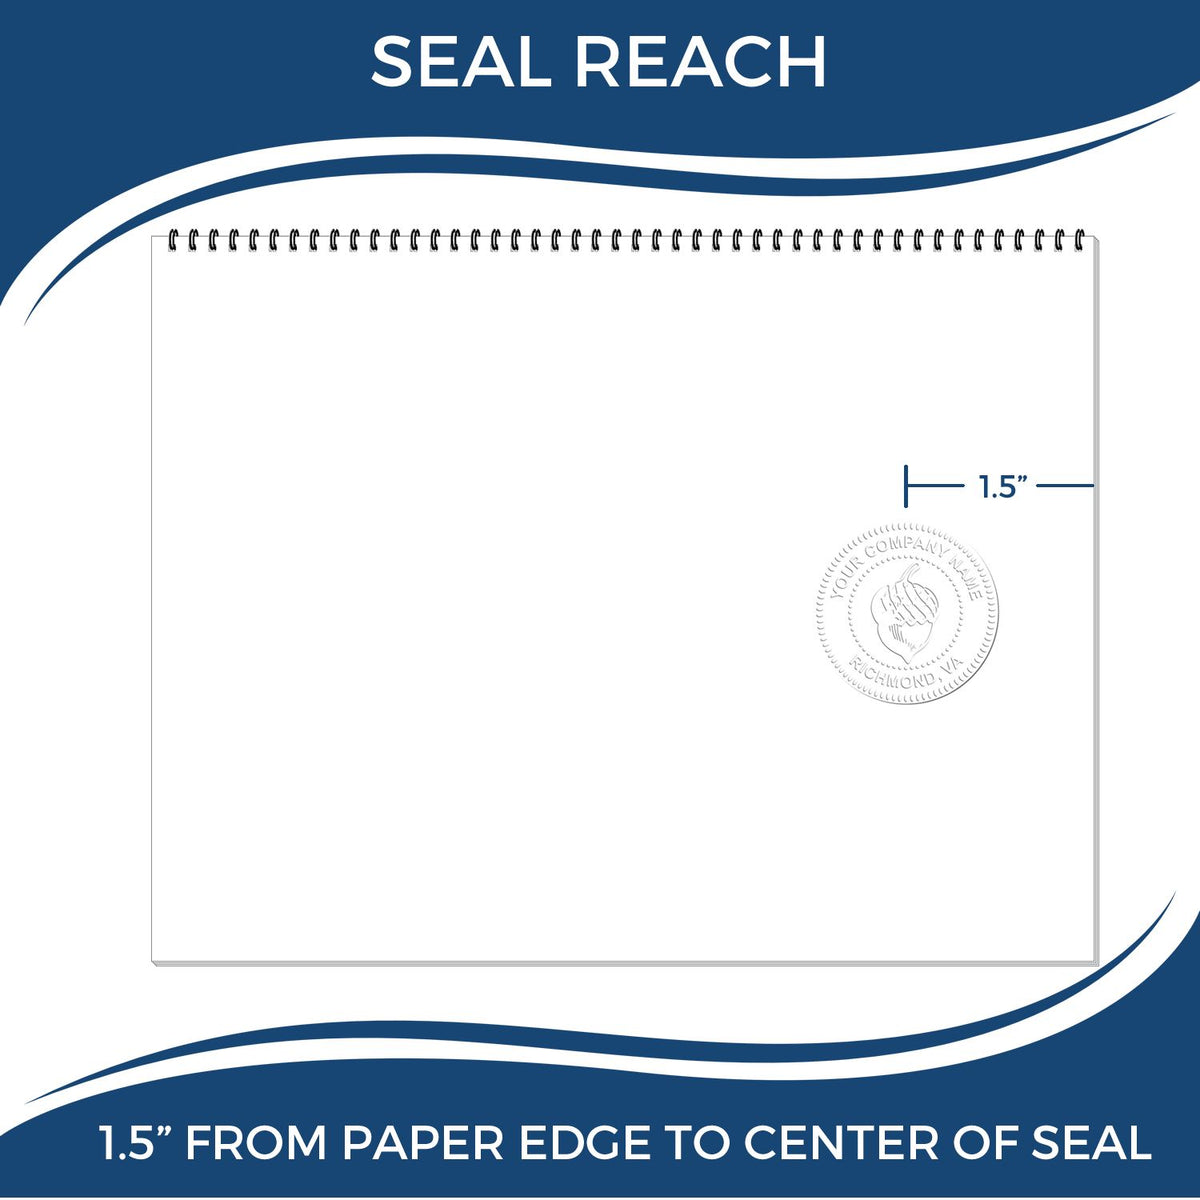 An infographic showing the seal reach which is represented by a ruler and a miniature seal image of the Soft Alaska Professional Geologist Seal